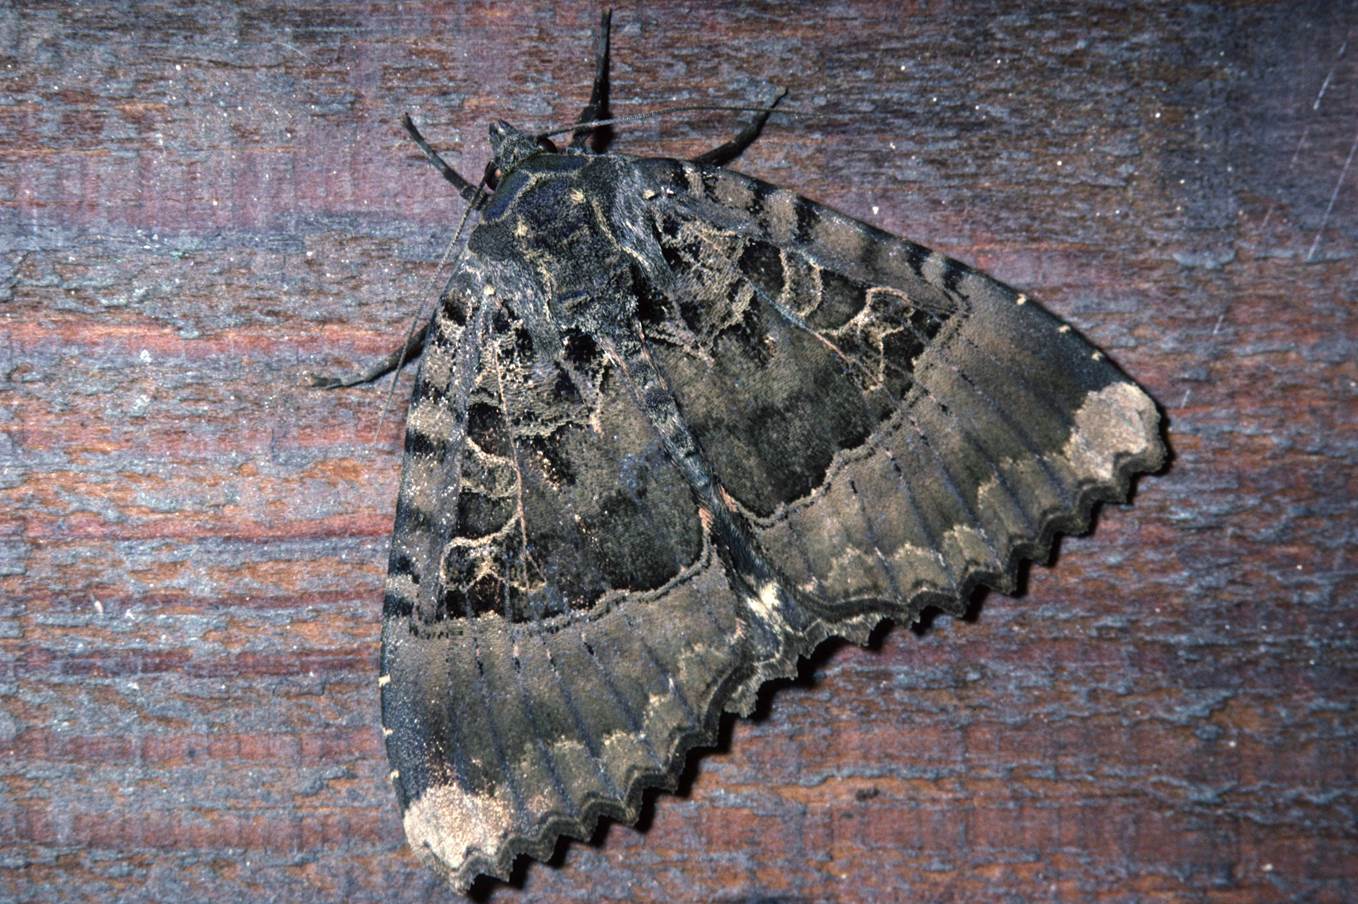 A moth on a wood surface

Description automatically generated